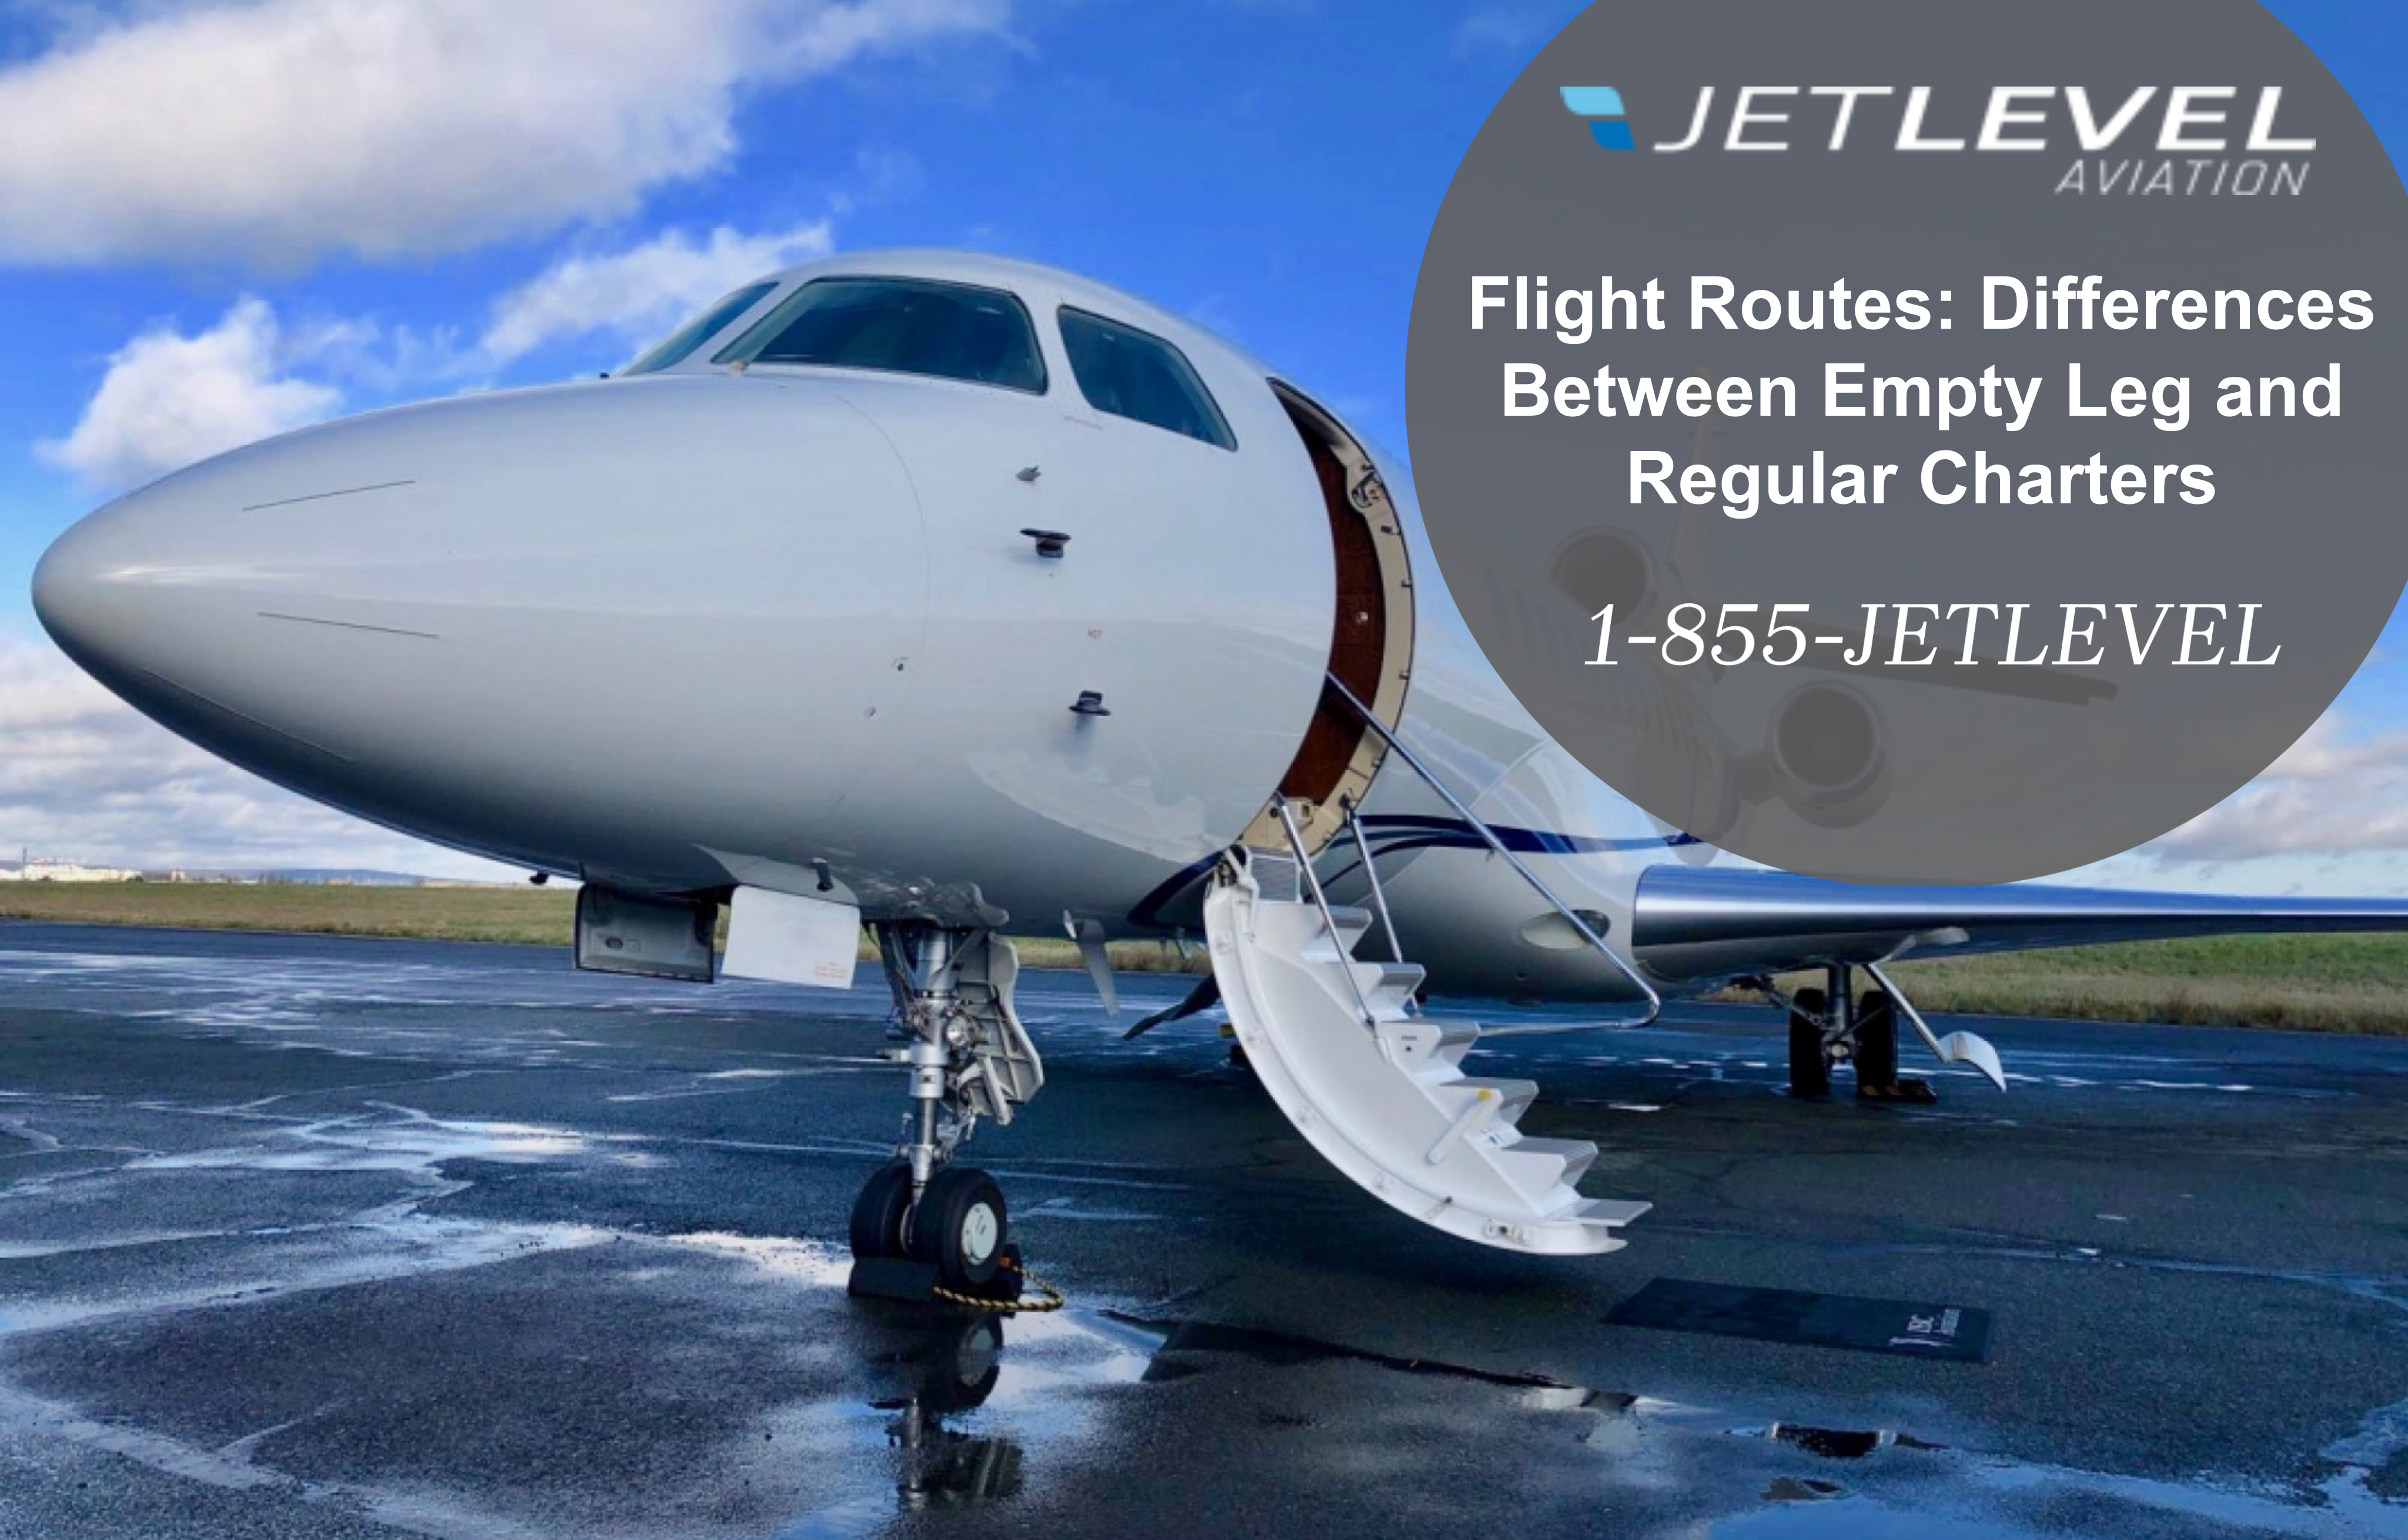 Flight Routes: Differences Between Empty Leg and Regular Charters